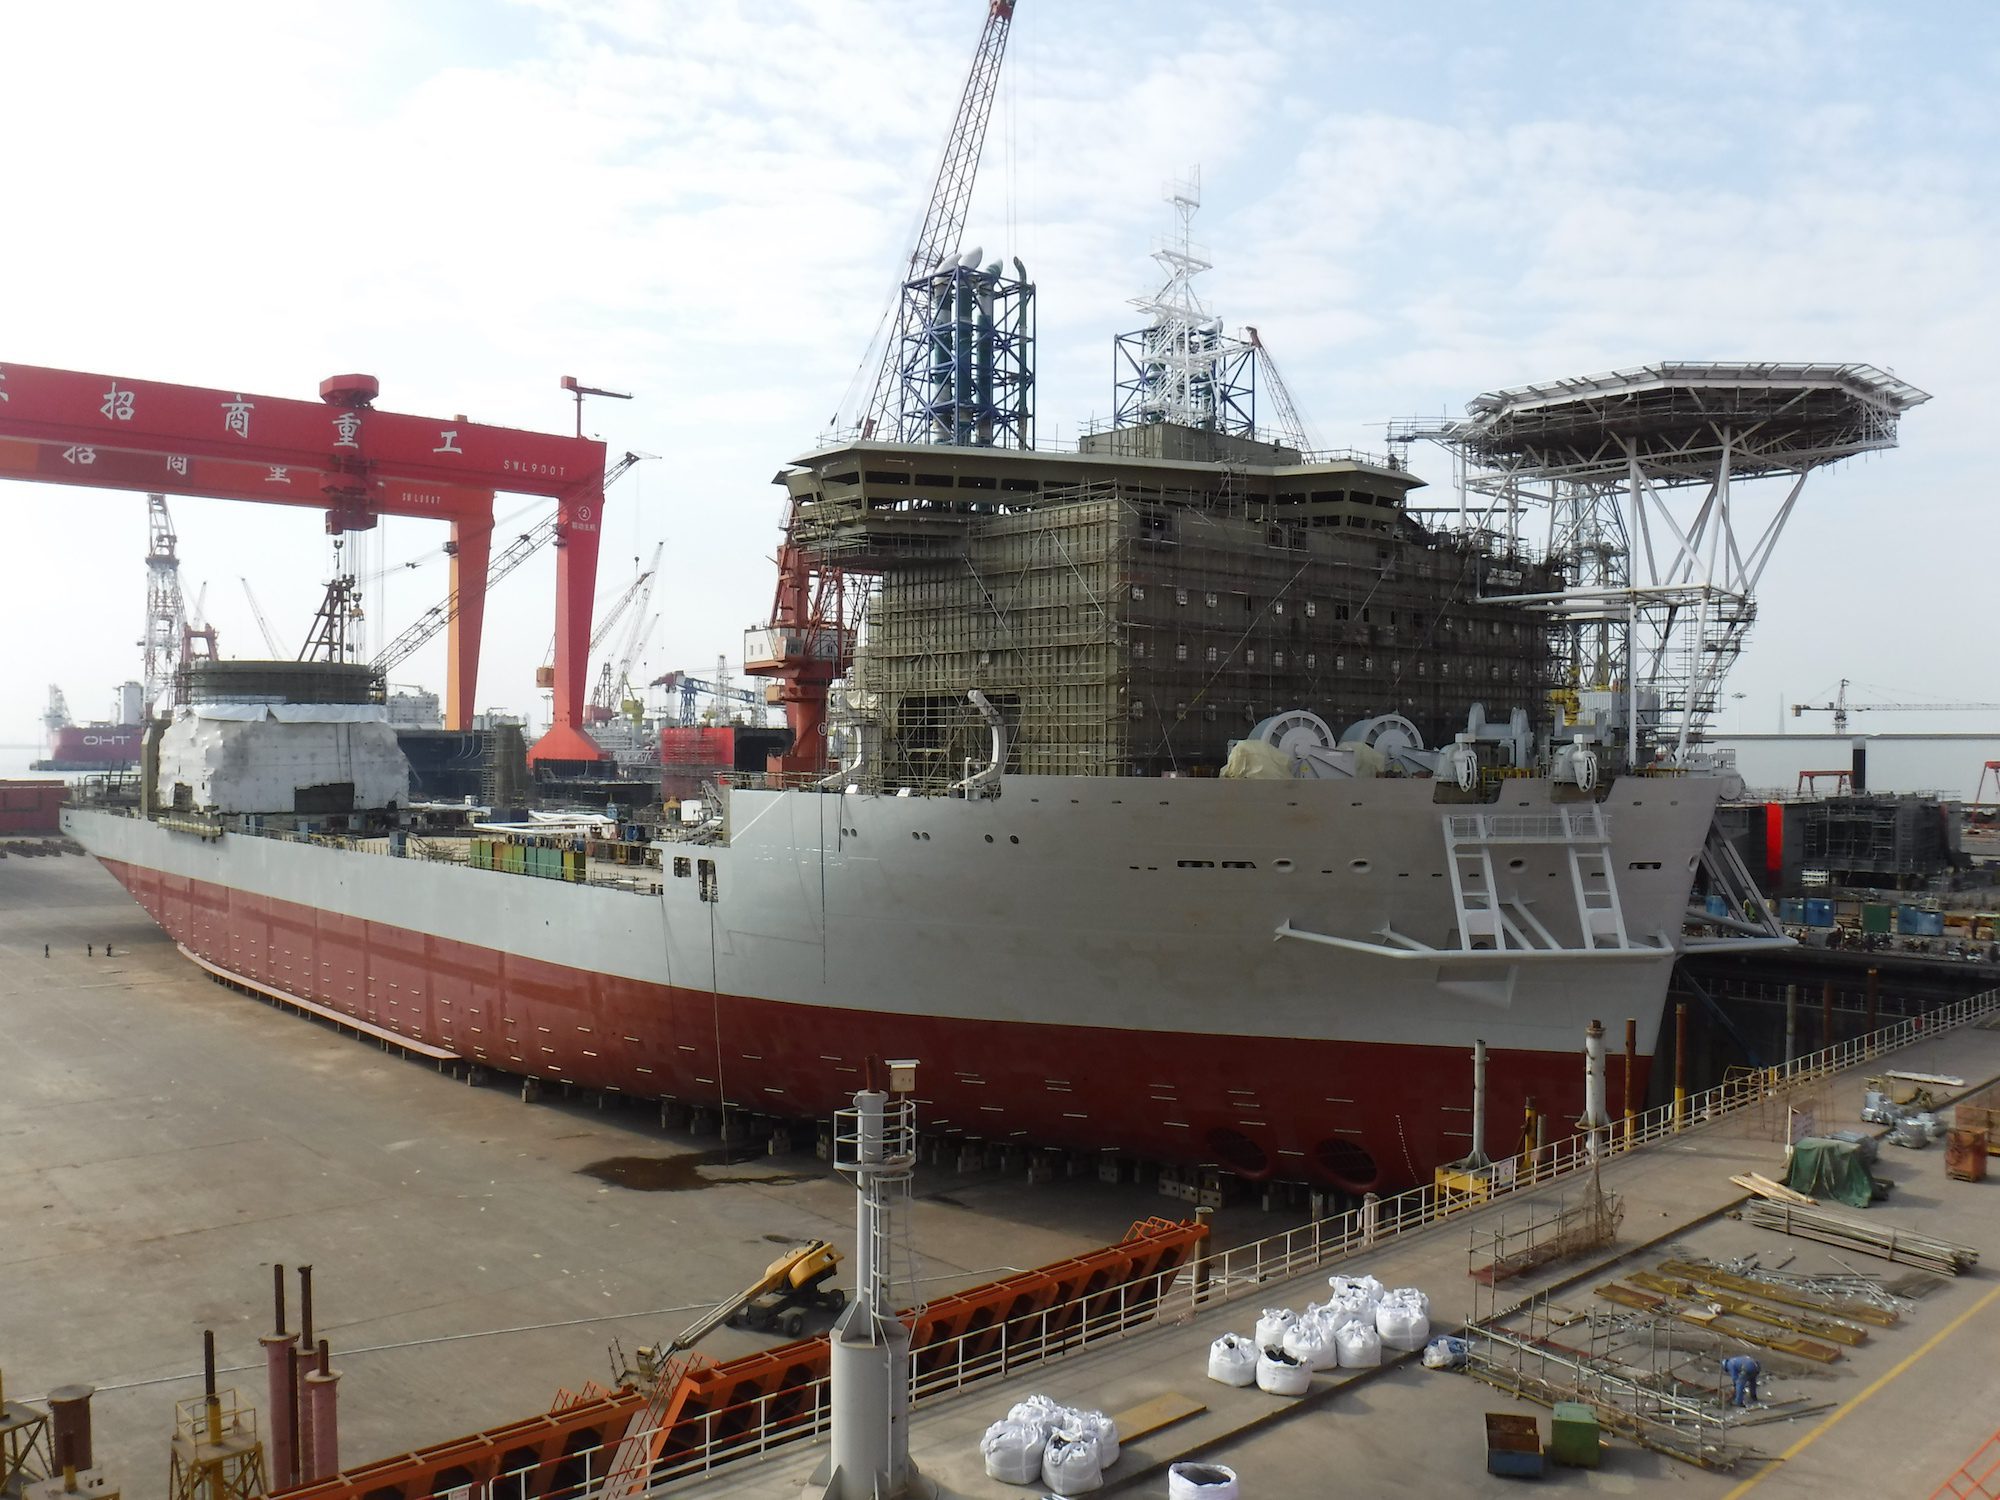 Jan De Nul’s Next-Generation Offshore Installation Ship Launched in China